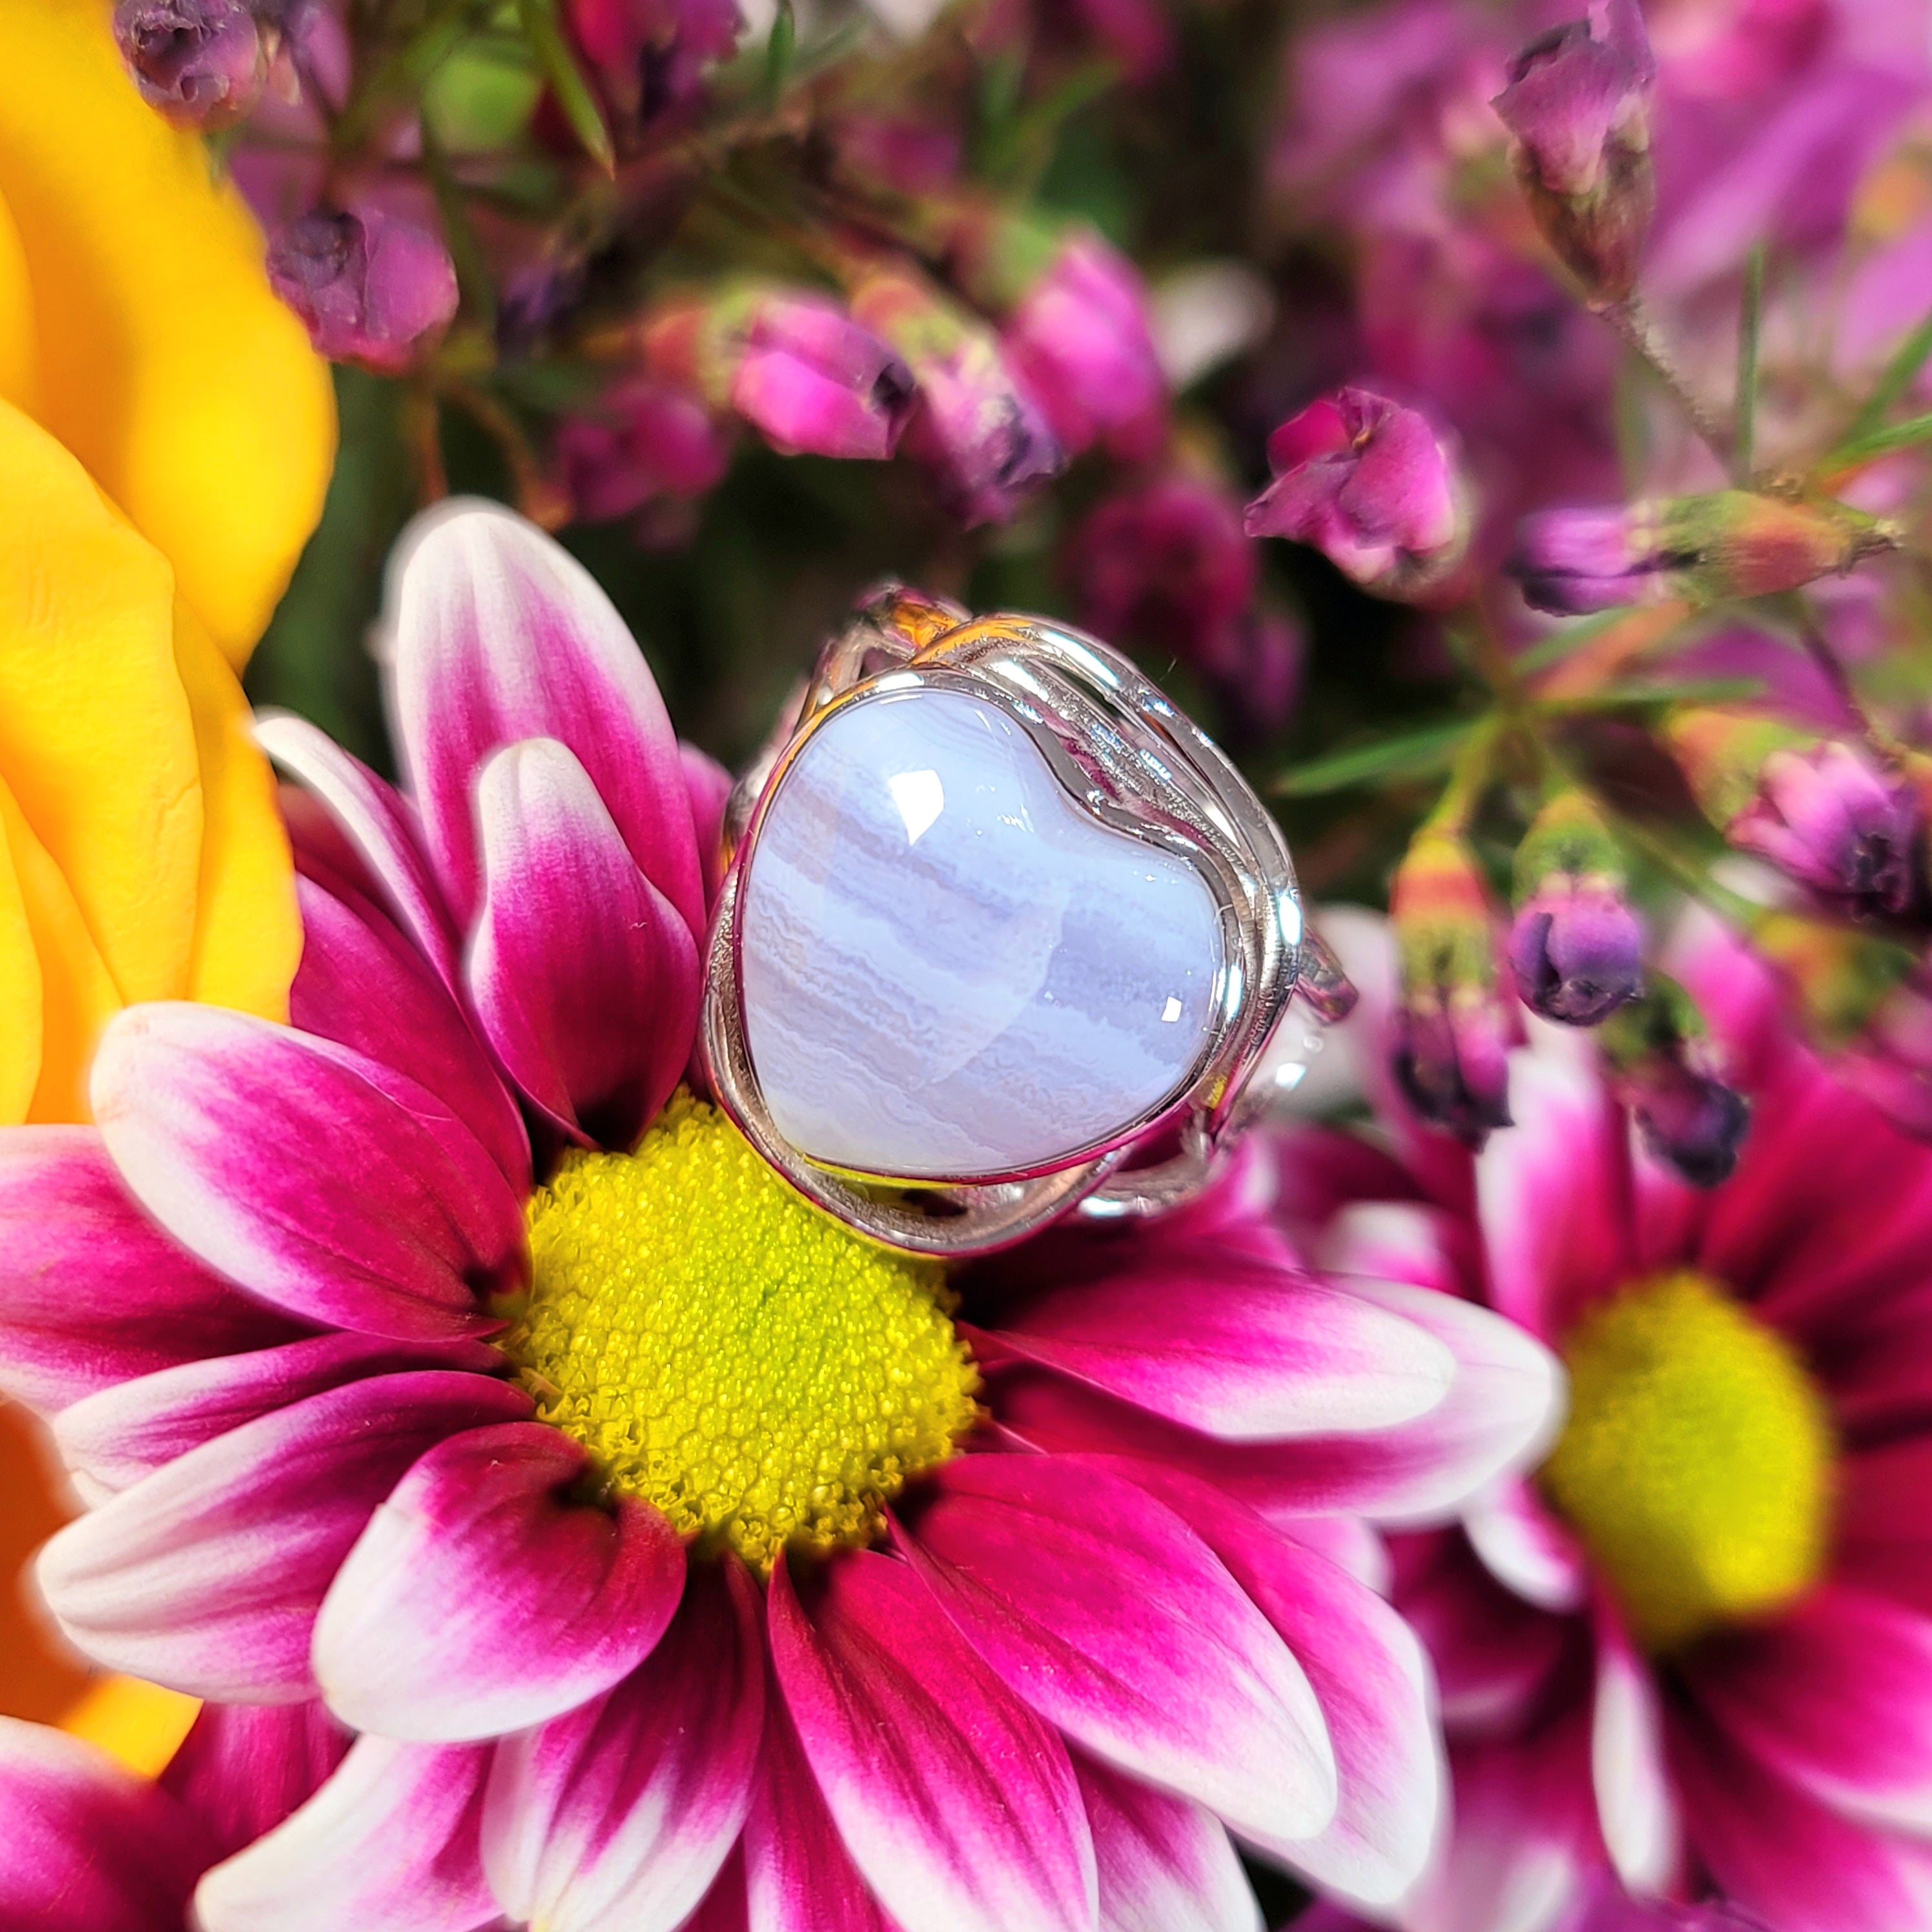 Blue Lace Agate Heart Adjustable Finger Cuff Ring .925 Silver for Soothing Emotions and Improving Communication